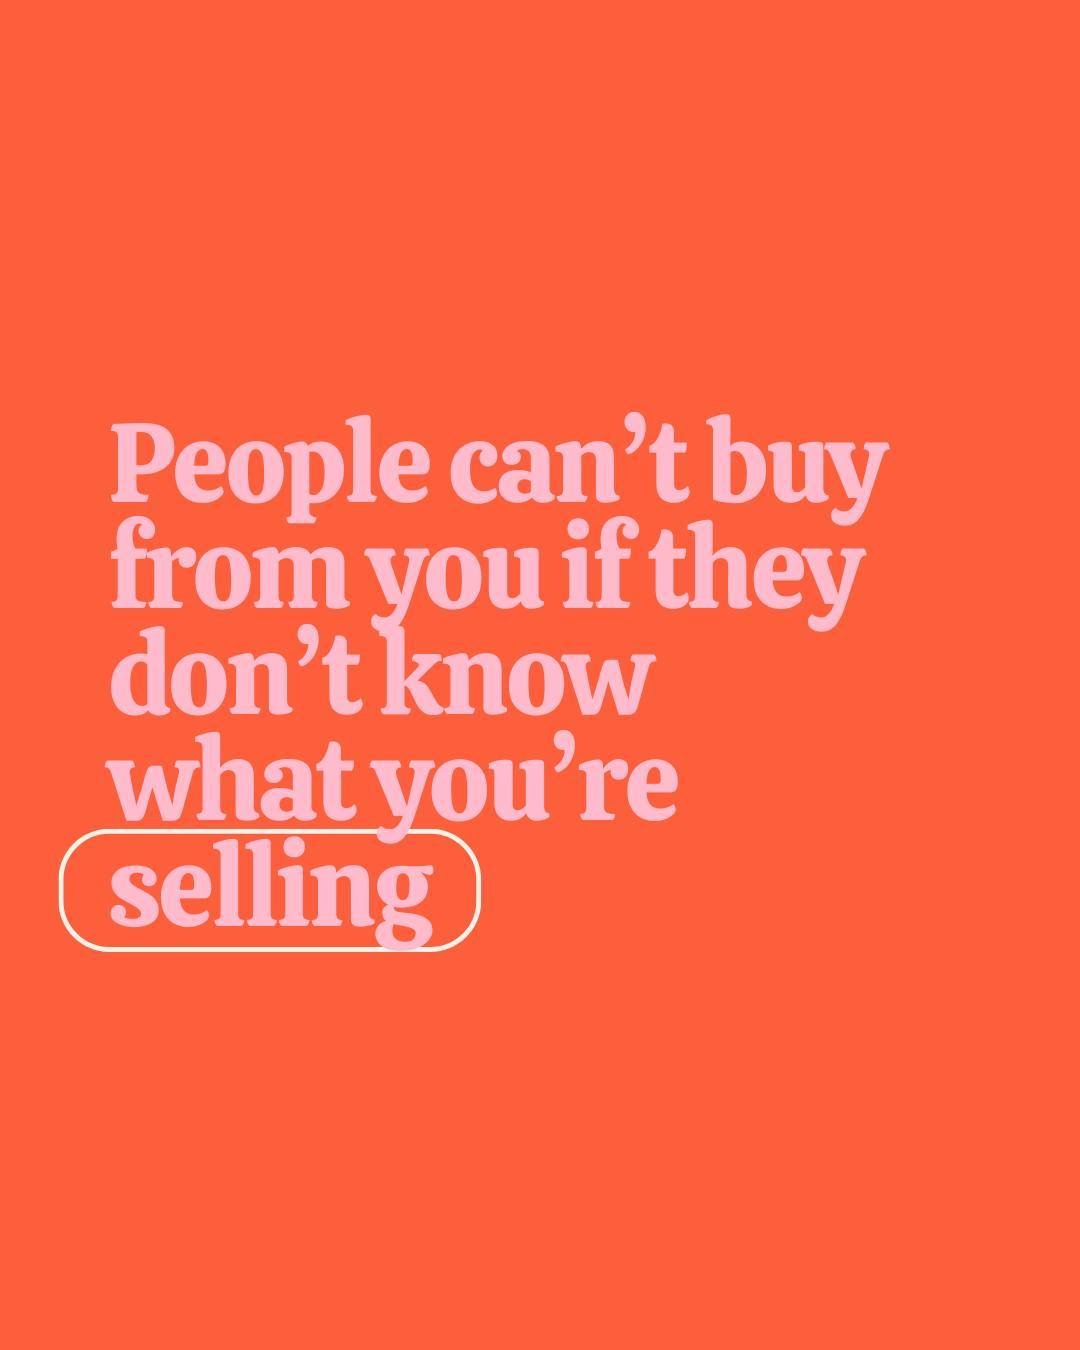 One thing I hear all the time

&quot;I hate being salesy, it makes me cringe&quot;.

I'm not saying you need to be a used car salesman on your Instagram feed.

But confidently and clearly stating how people can work with you is the first step to conv